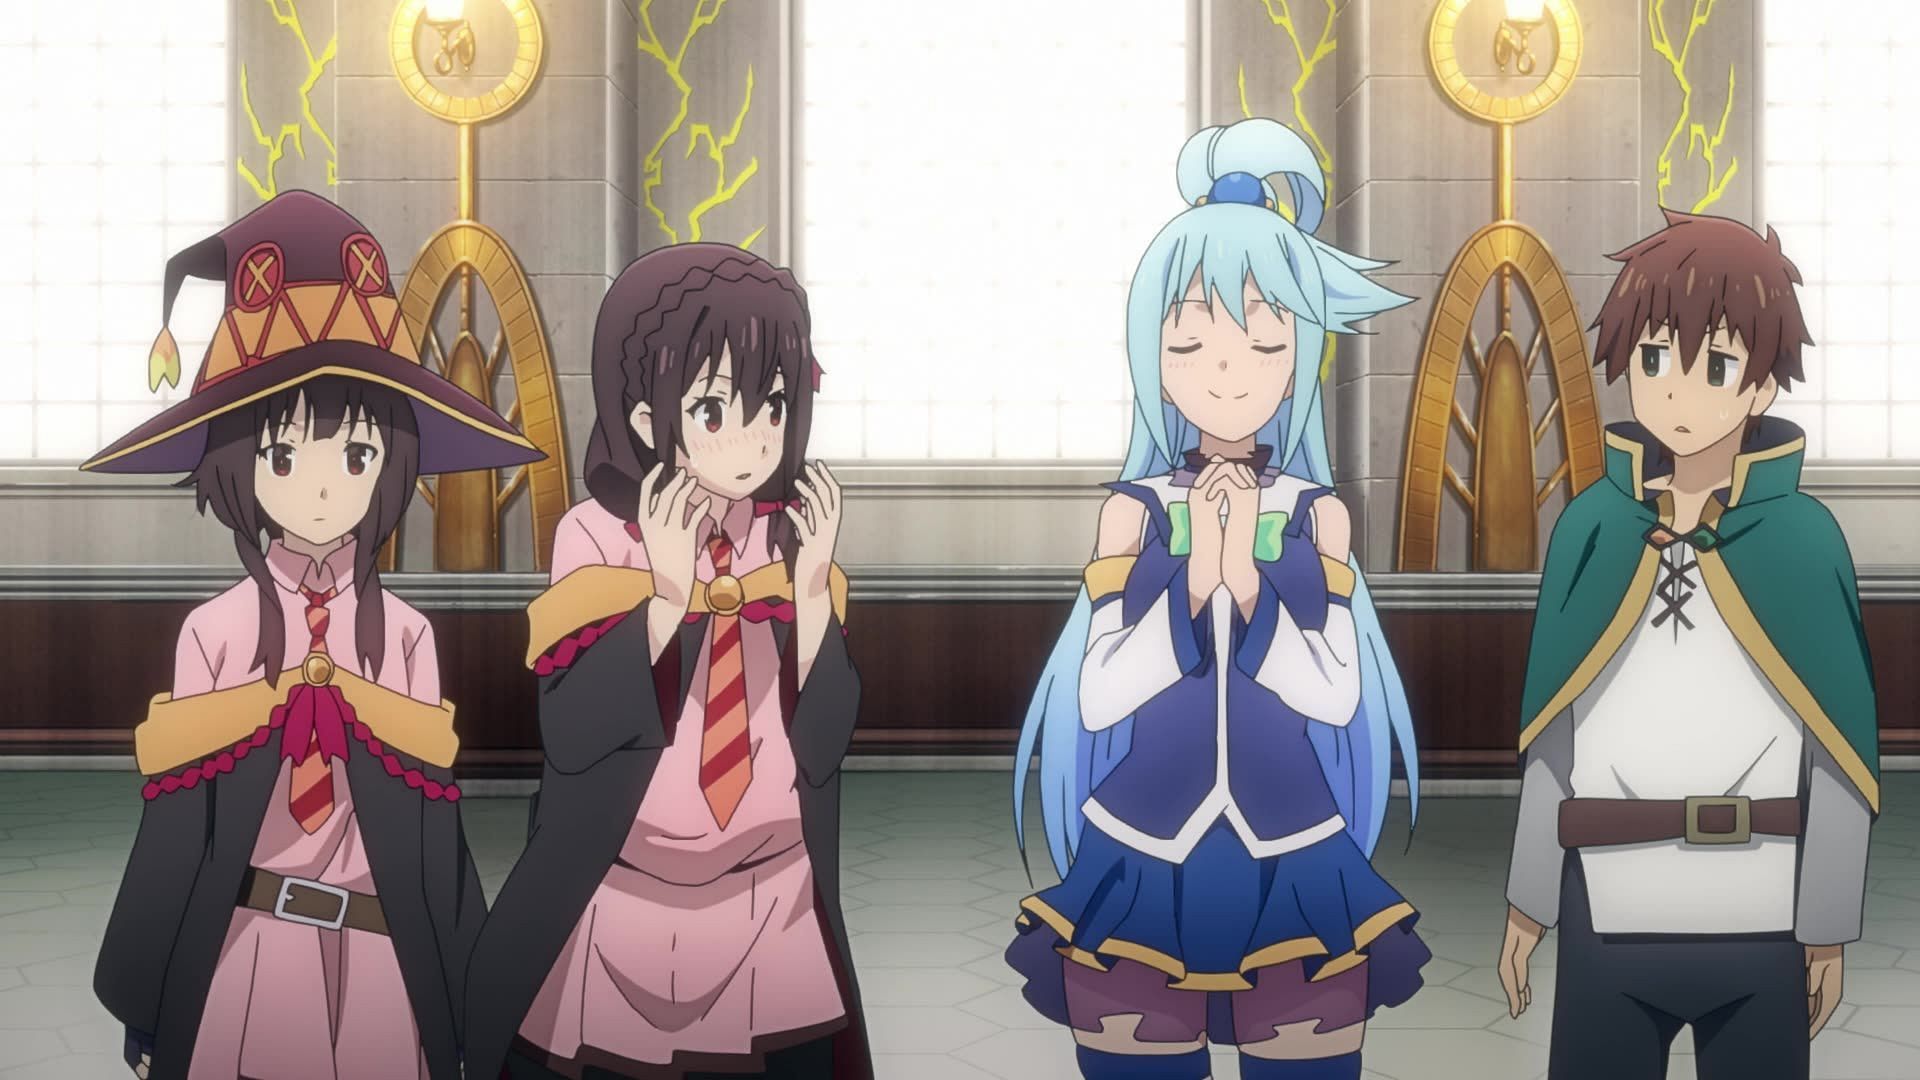 The memes can get a little repetitive, but they are never mean-spirited (Image credit: Natsume Akatsuki, Konosuba)